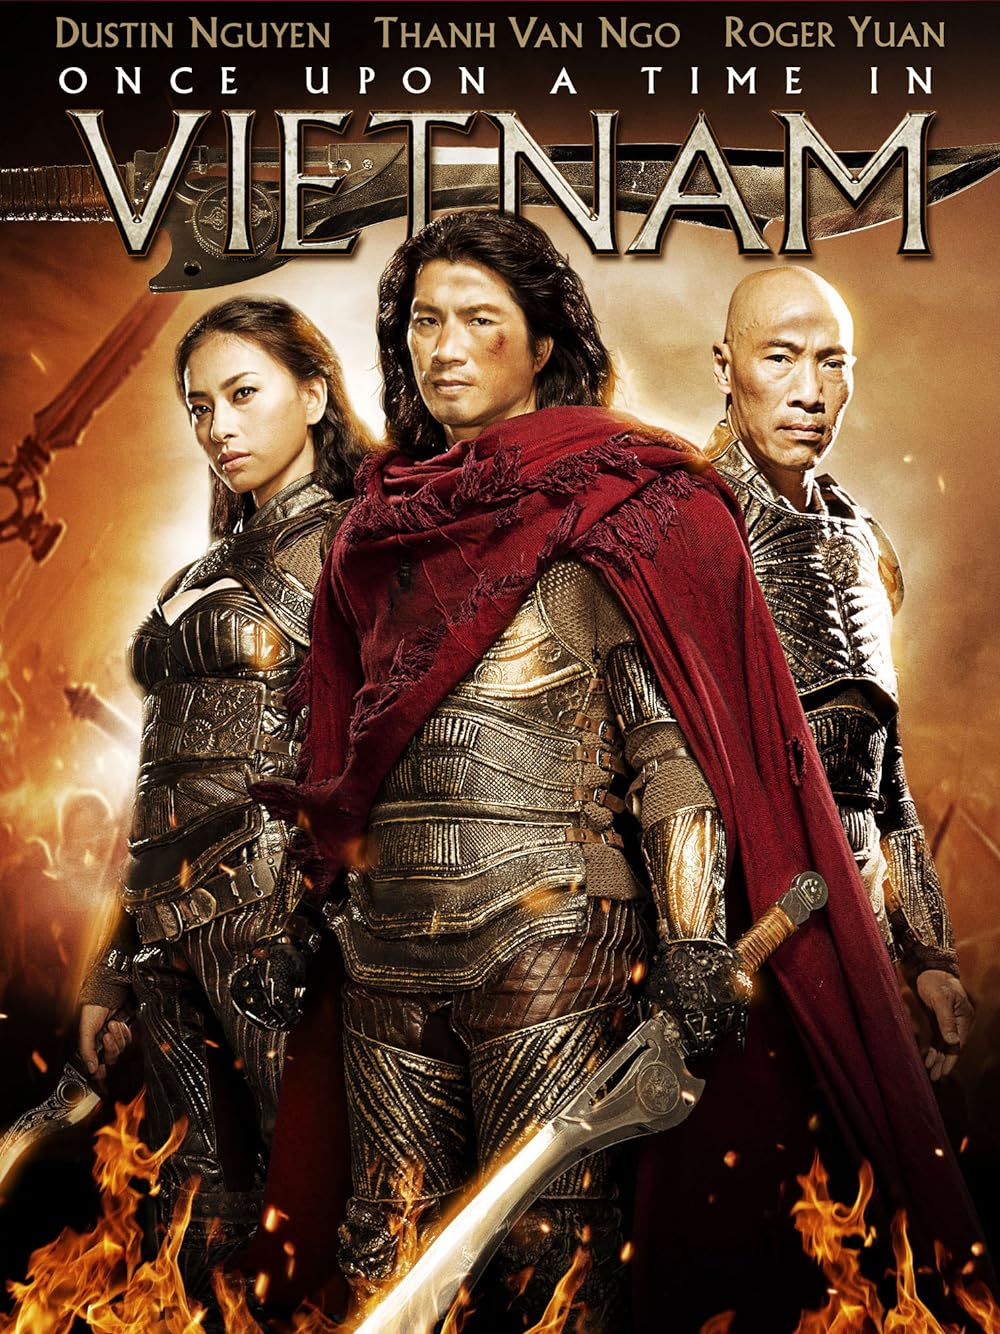 Once Upon a Time in Vietnam (2013) จอมคนดาบมหากาฬ